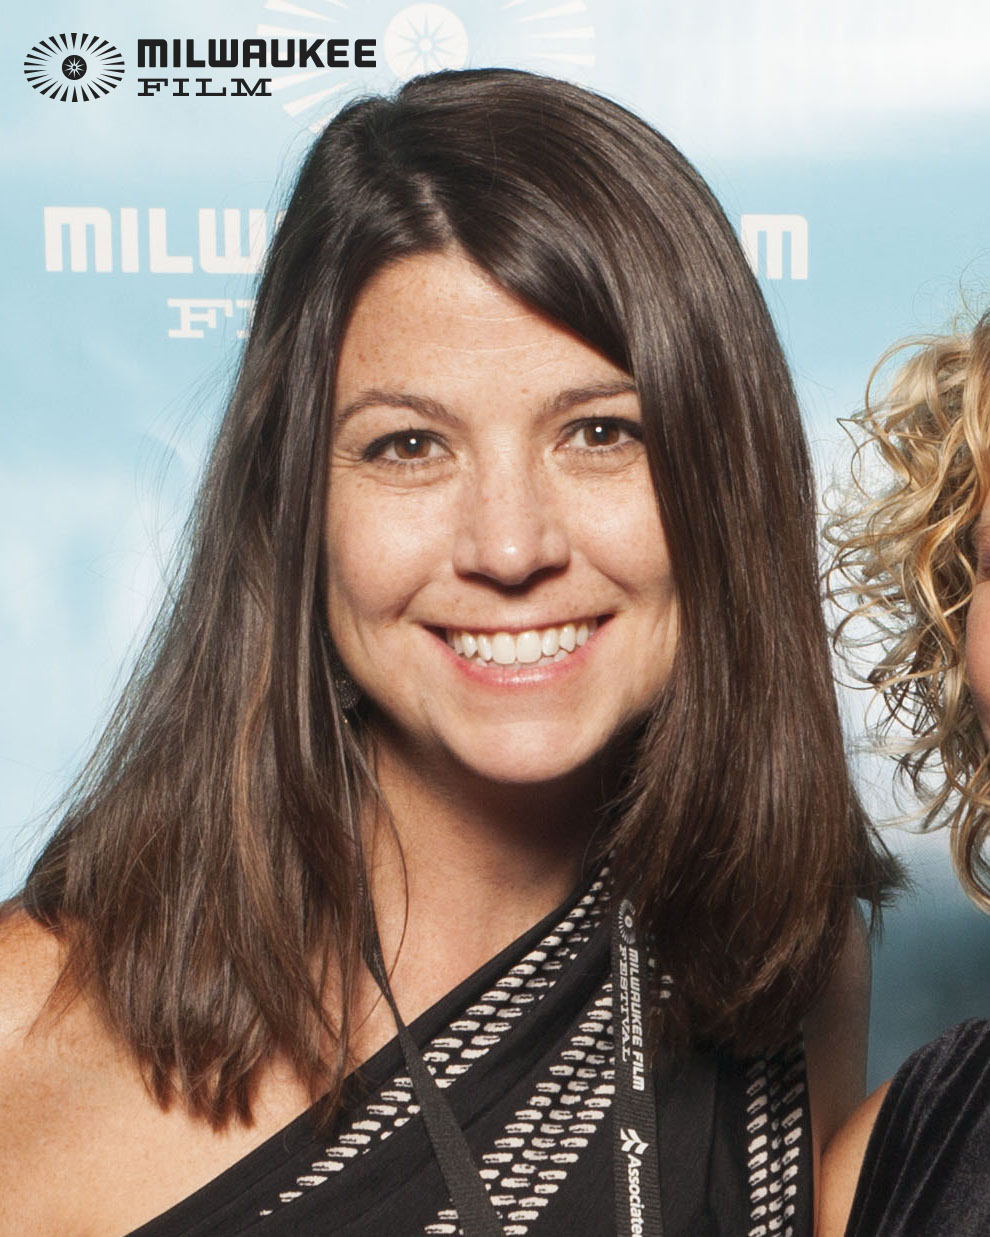 Milwaukee Film Hires Sara Meaney to New Chief Marketing Officer Role